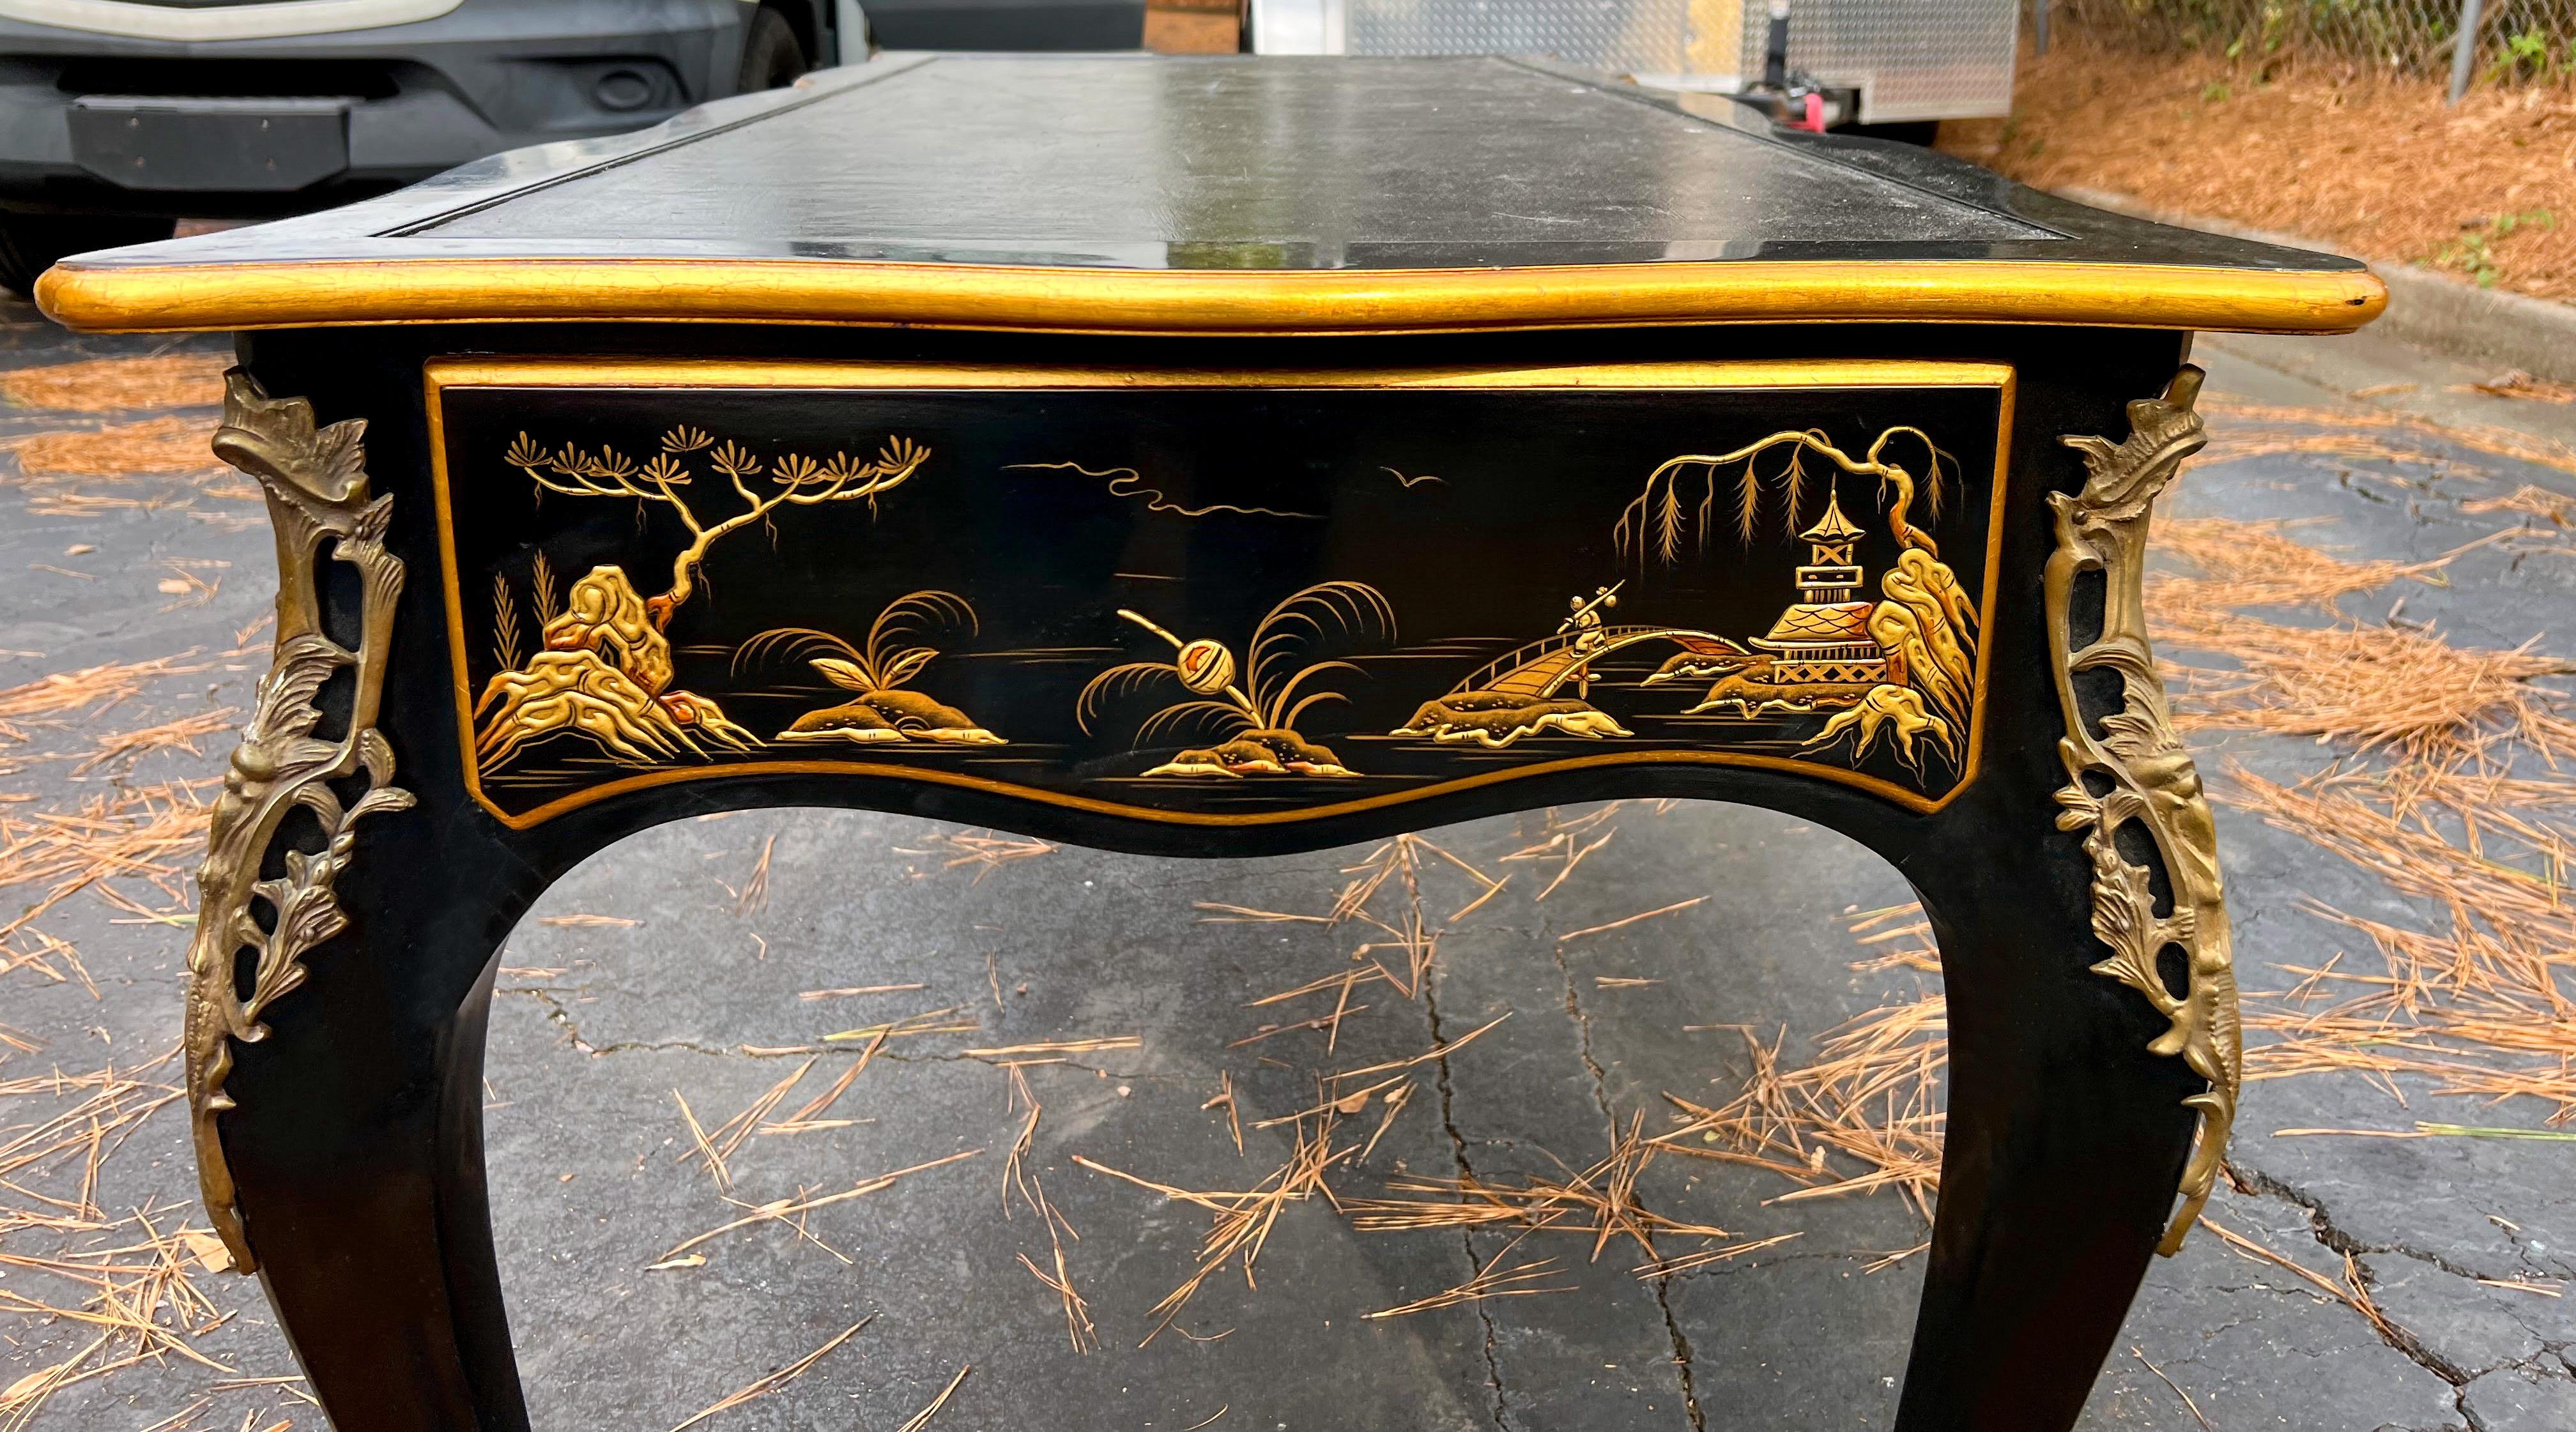 This is a special piece! This is a Louis XV style writing desk by Baker Furniture Co. it has a black leather top and bronze appointments. The chinoiserie pastoral scenes are on a black lacquer background. It is a purported to be a piece that was